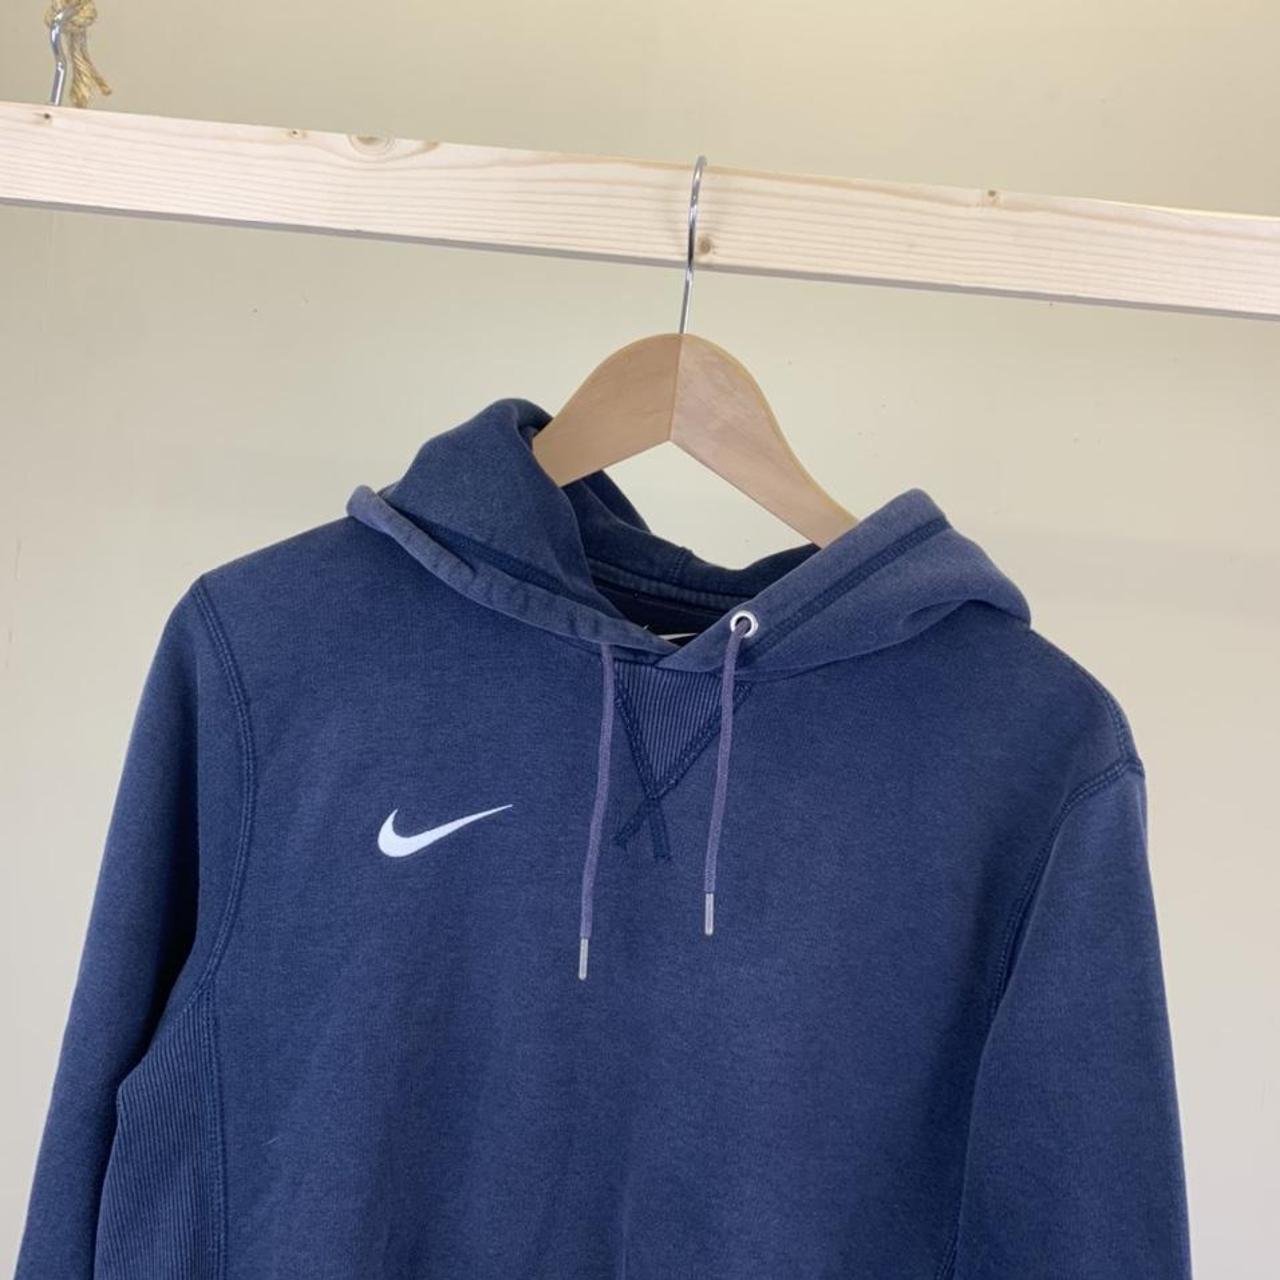 Mens navy blue nike pullover hoodie size Small in... - Depop